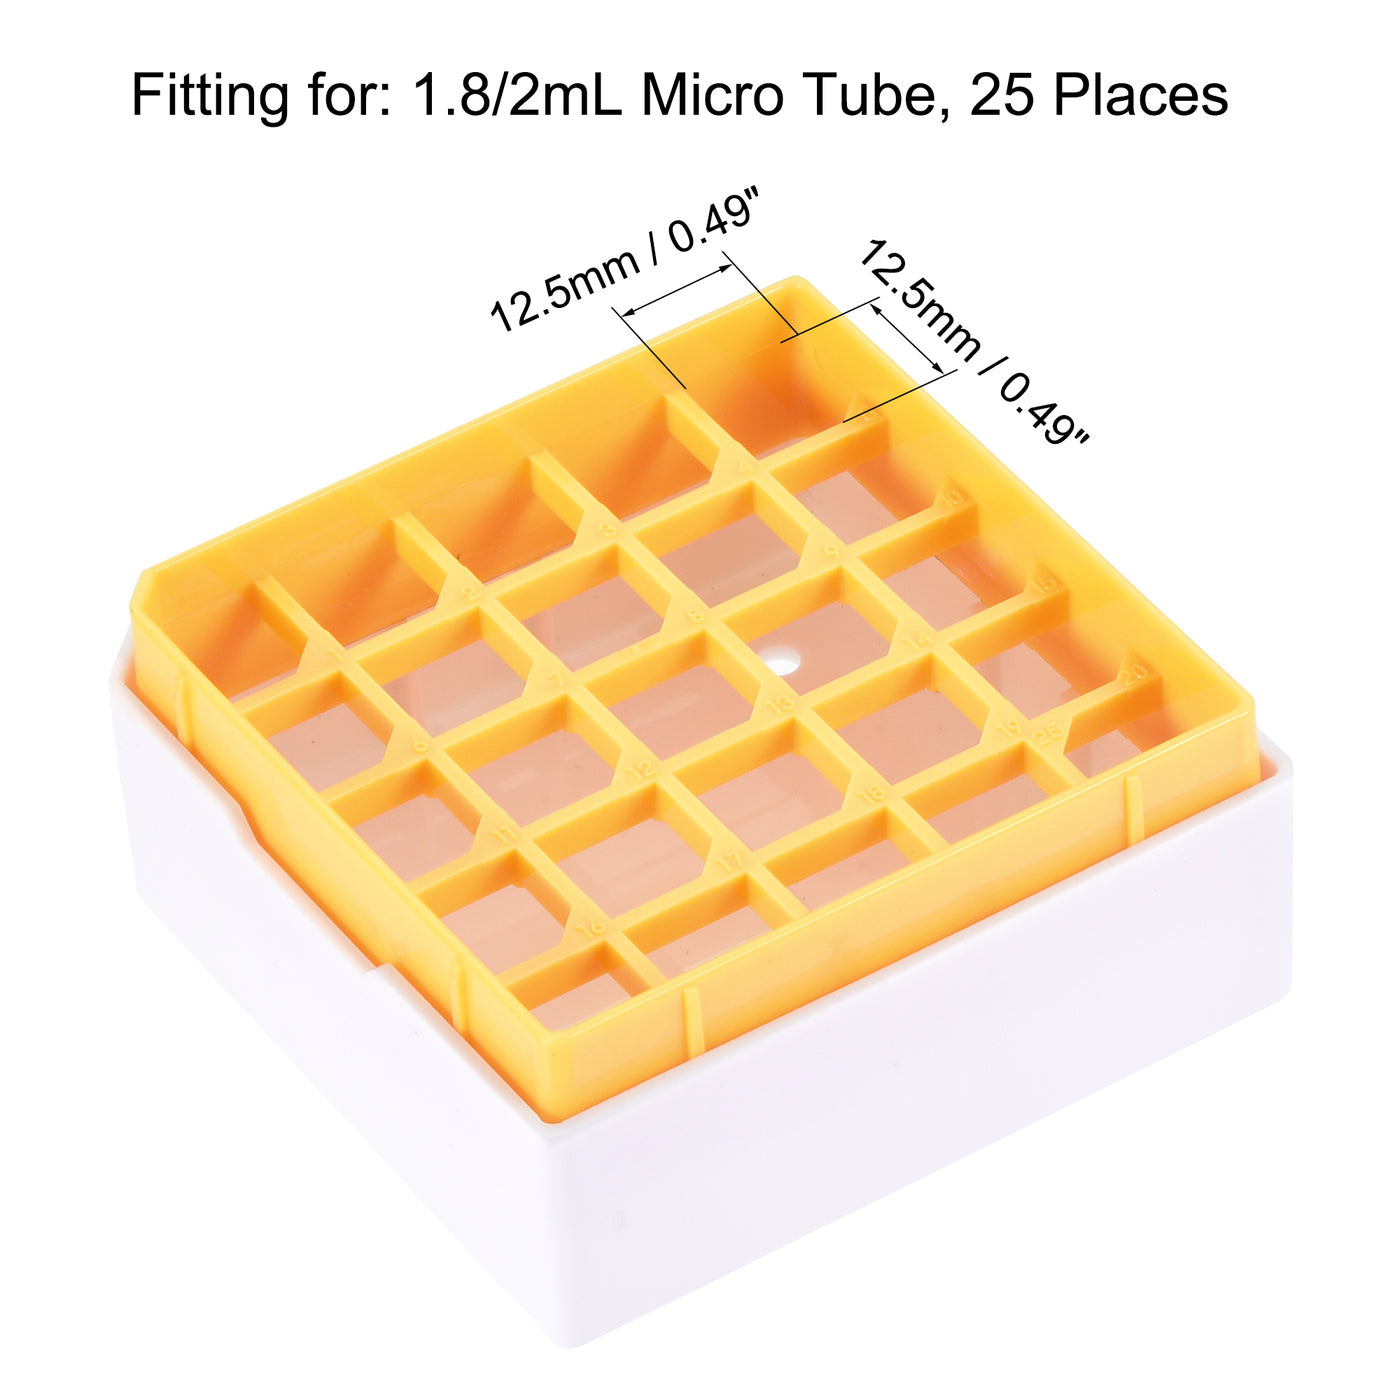 uxcell Uxcell Freezer Tube Box 25 Places Polypropylene Holder Rack for 1.8/2ml Microcentrifuge Tubes, Yellow 4Pcs